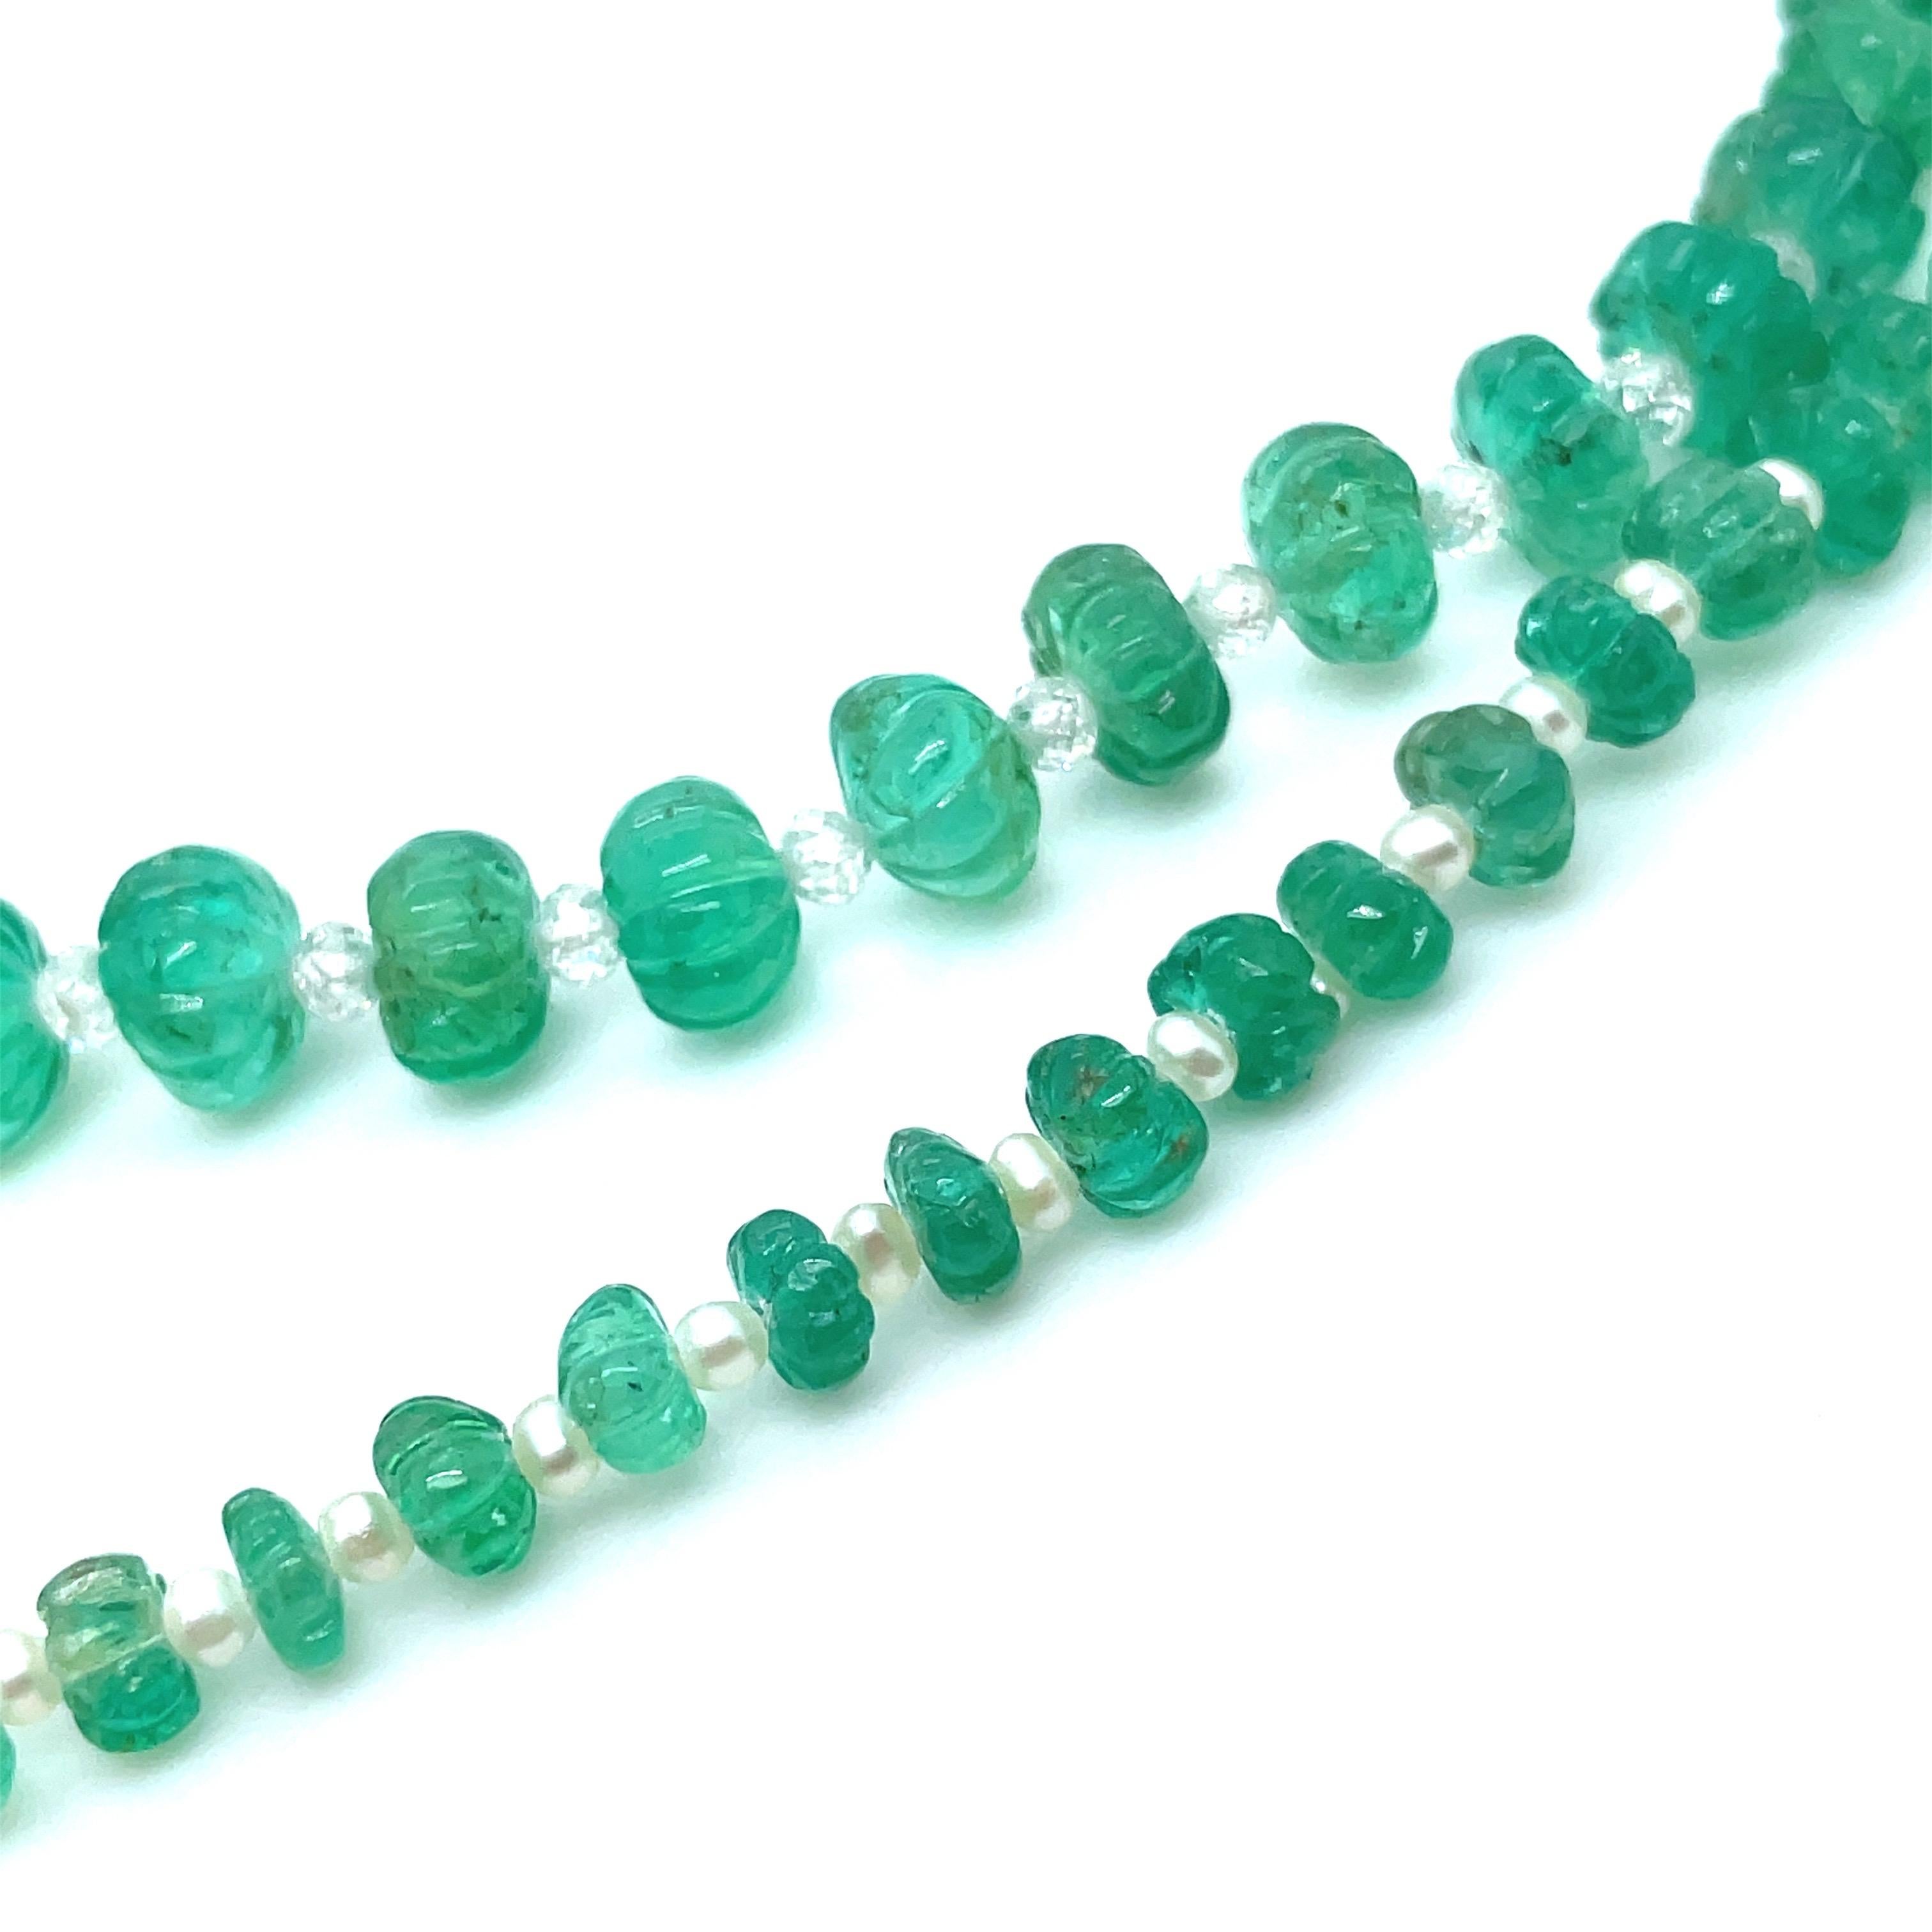 Originating from Zambia, Africa, this exquisite necklace features 125 emerald carvings totaling a magnificent 106.32 carats, complemented by 53 lustrous pearls weighing 5.16 carats.

It is also accentuated with 53 dazzling briolette diamonds